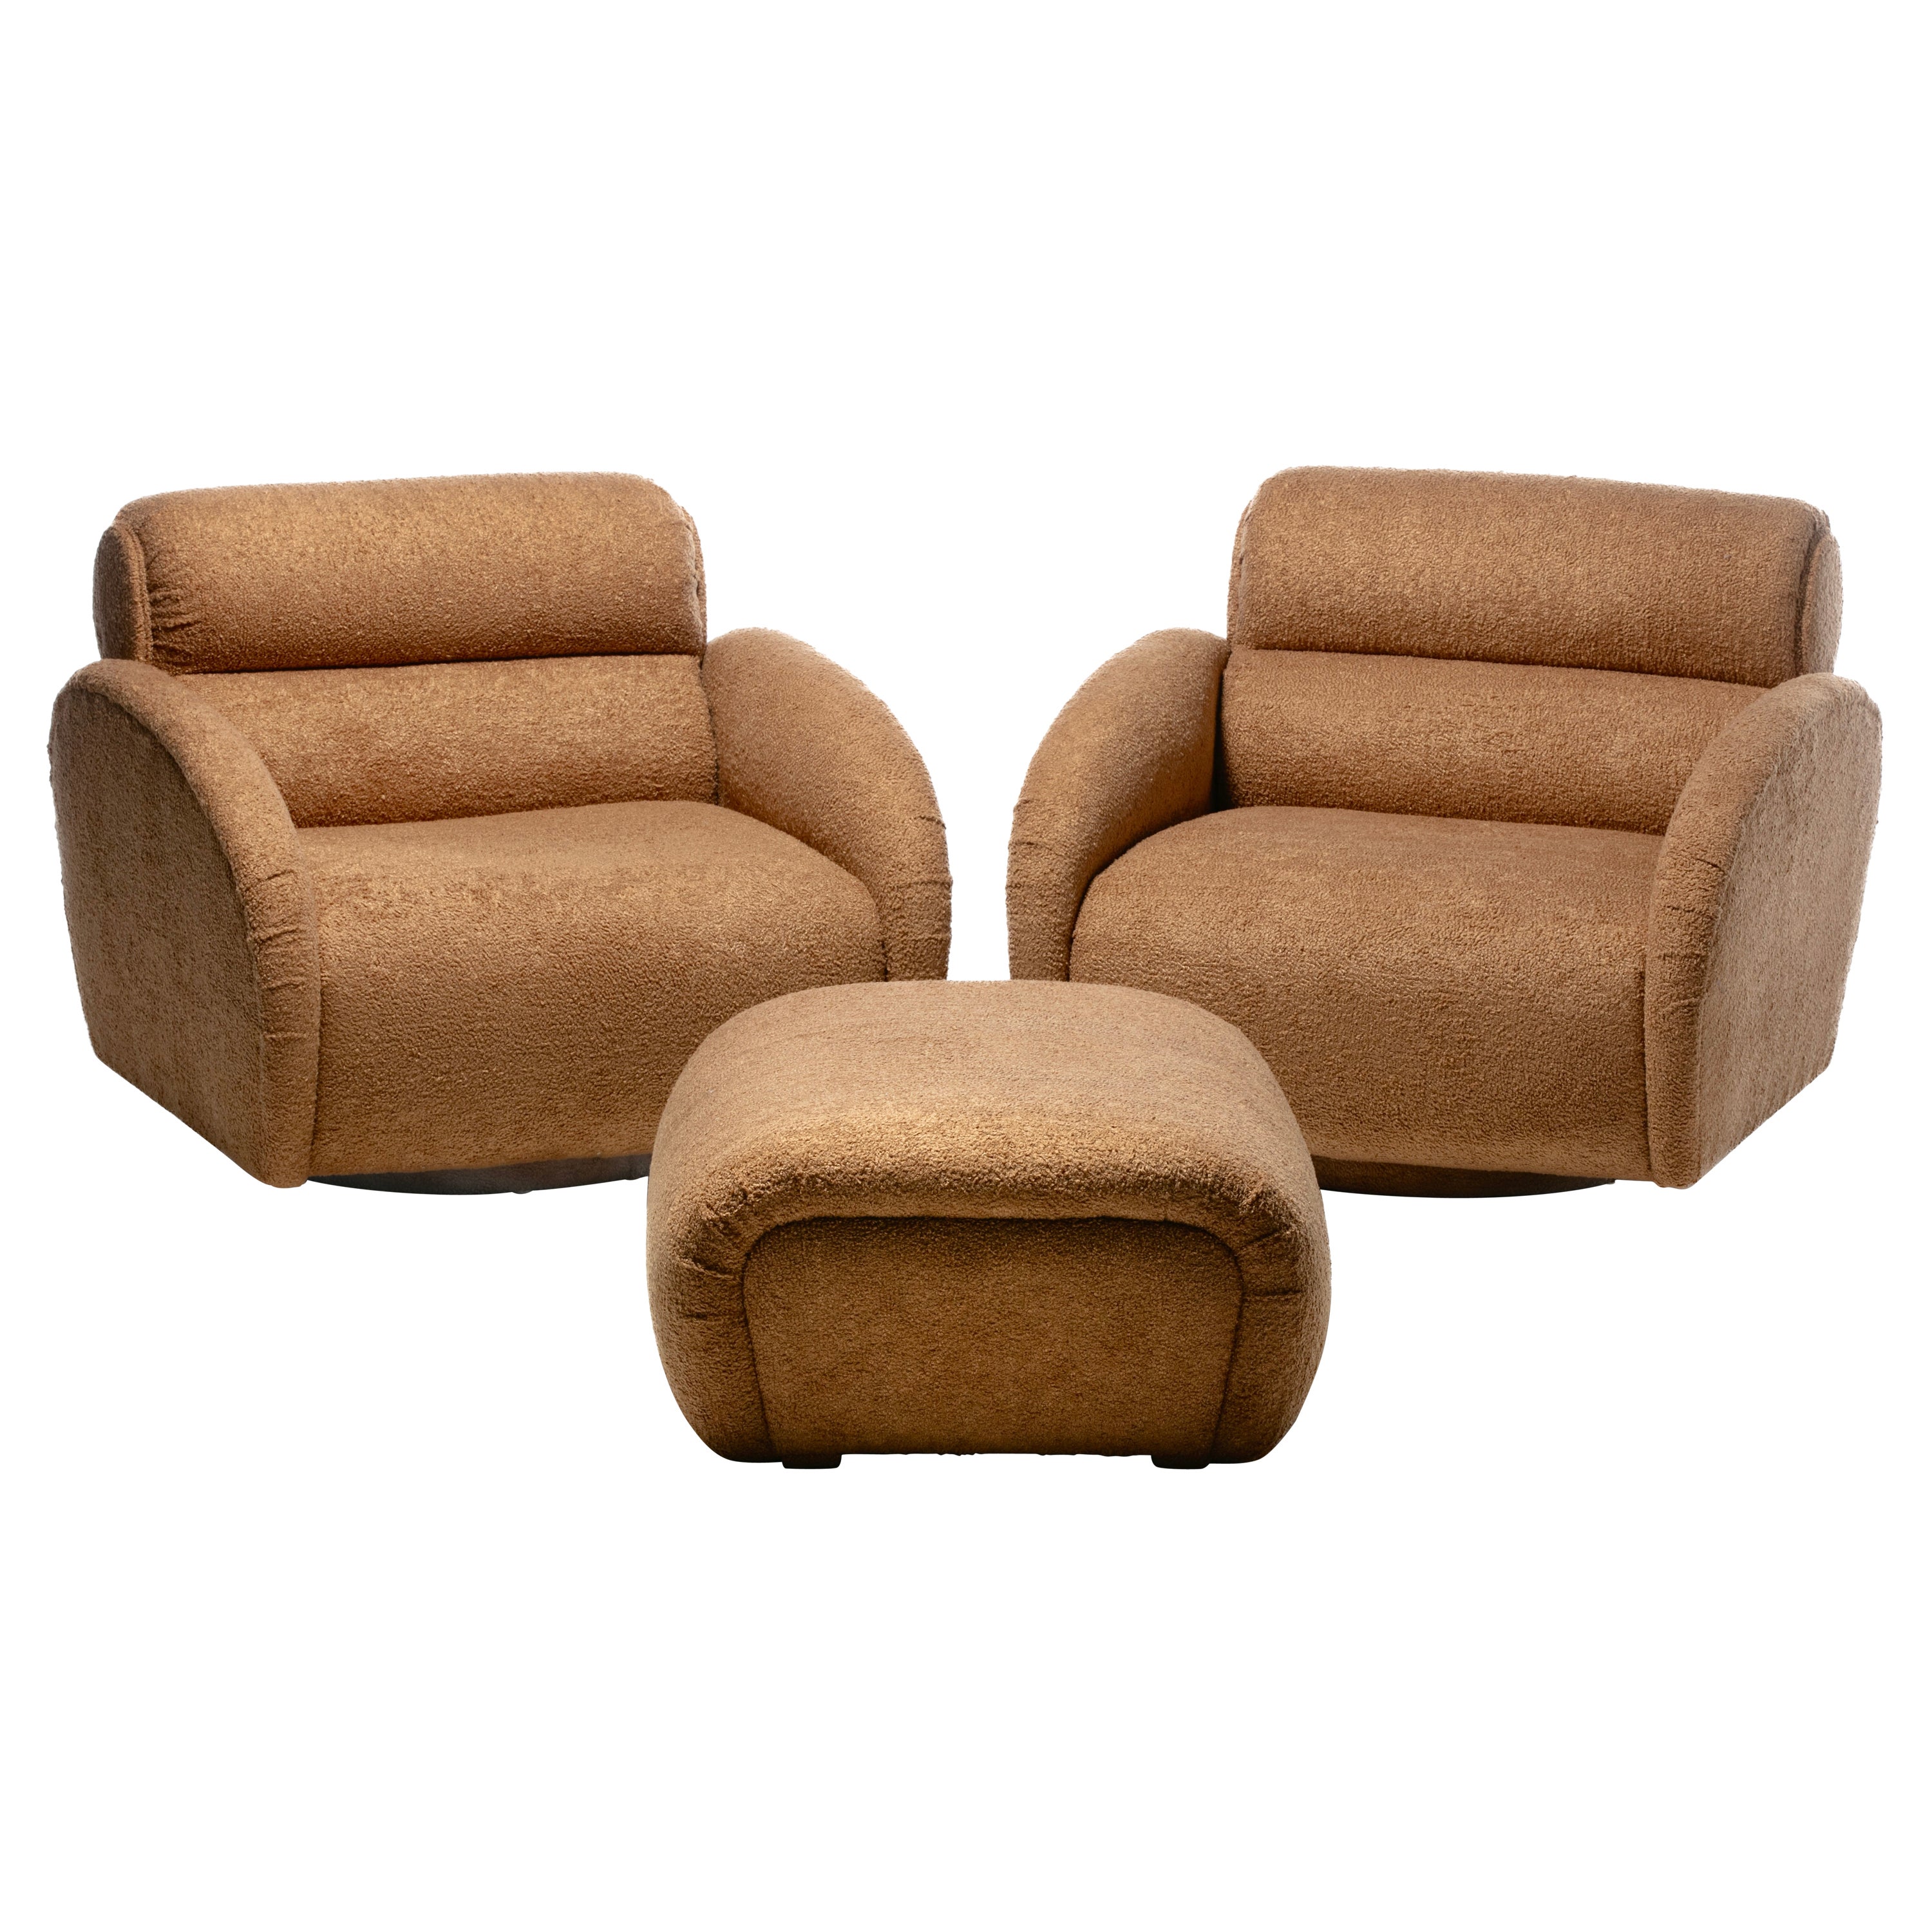 Large Scale Directional Post Modern Swivel Chairs & Ottoman in Mocha Fabric